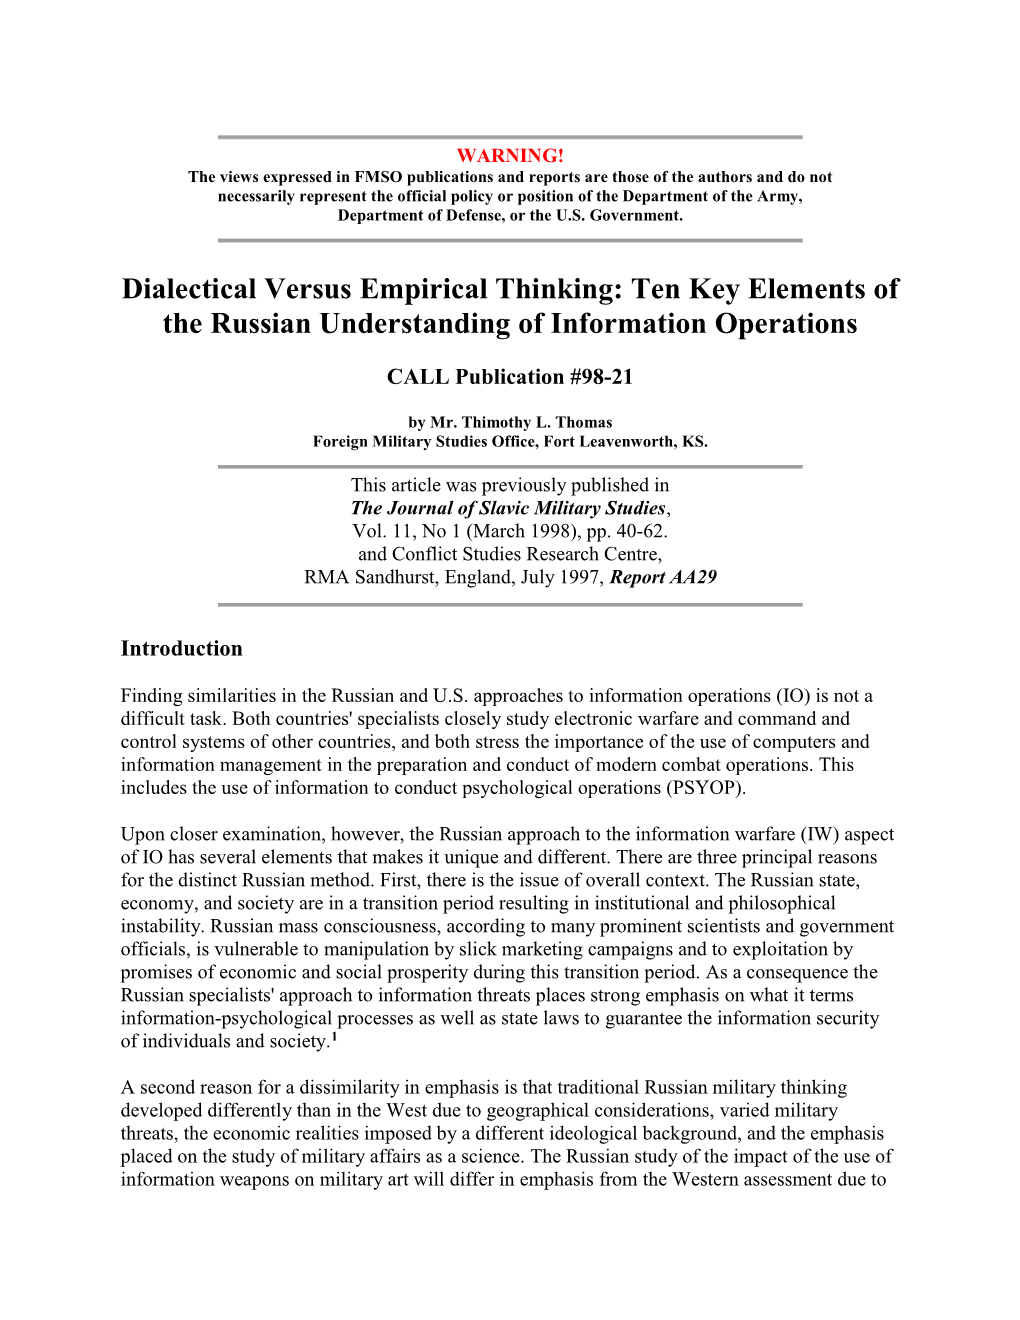 Dialectical Versus Empirical Thinking: Ten Key Elements of the Russian Understanding of Information Operations